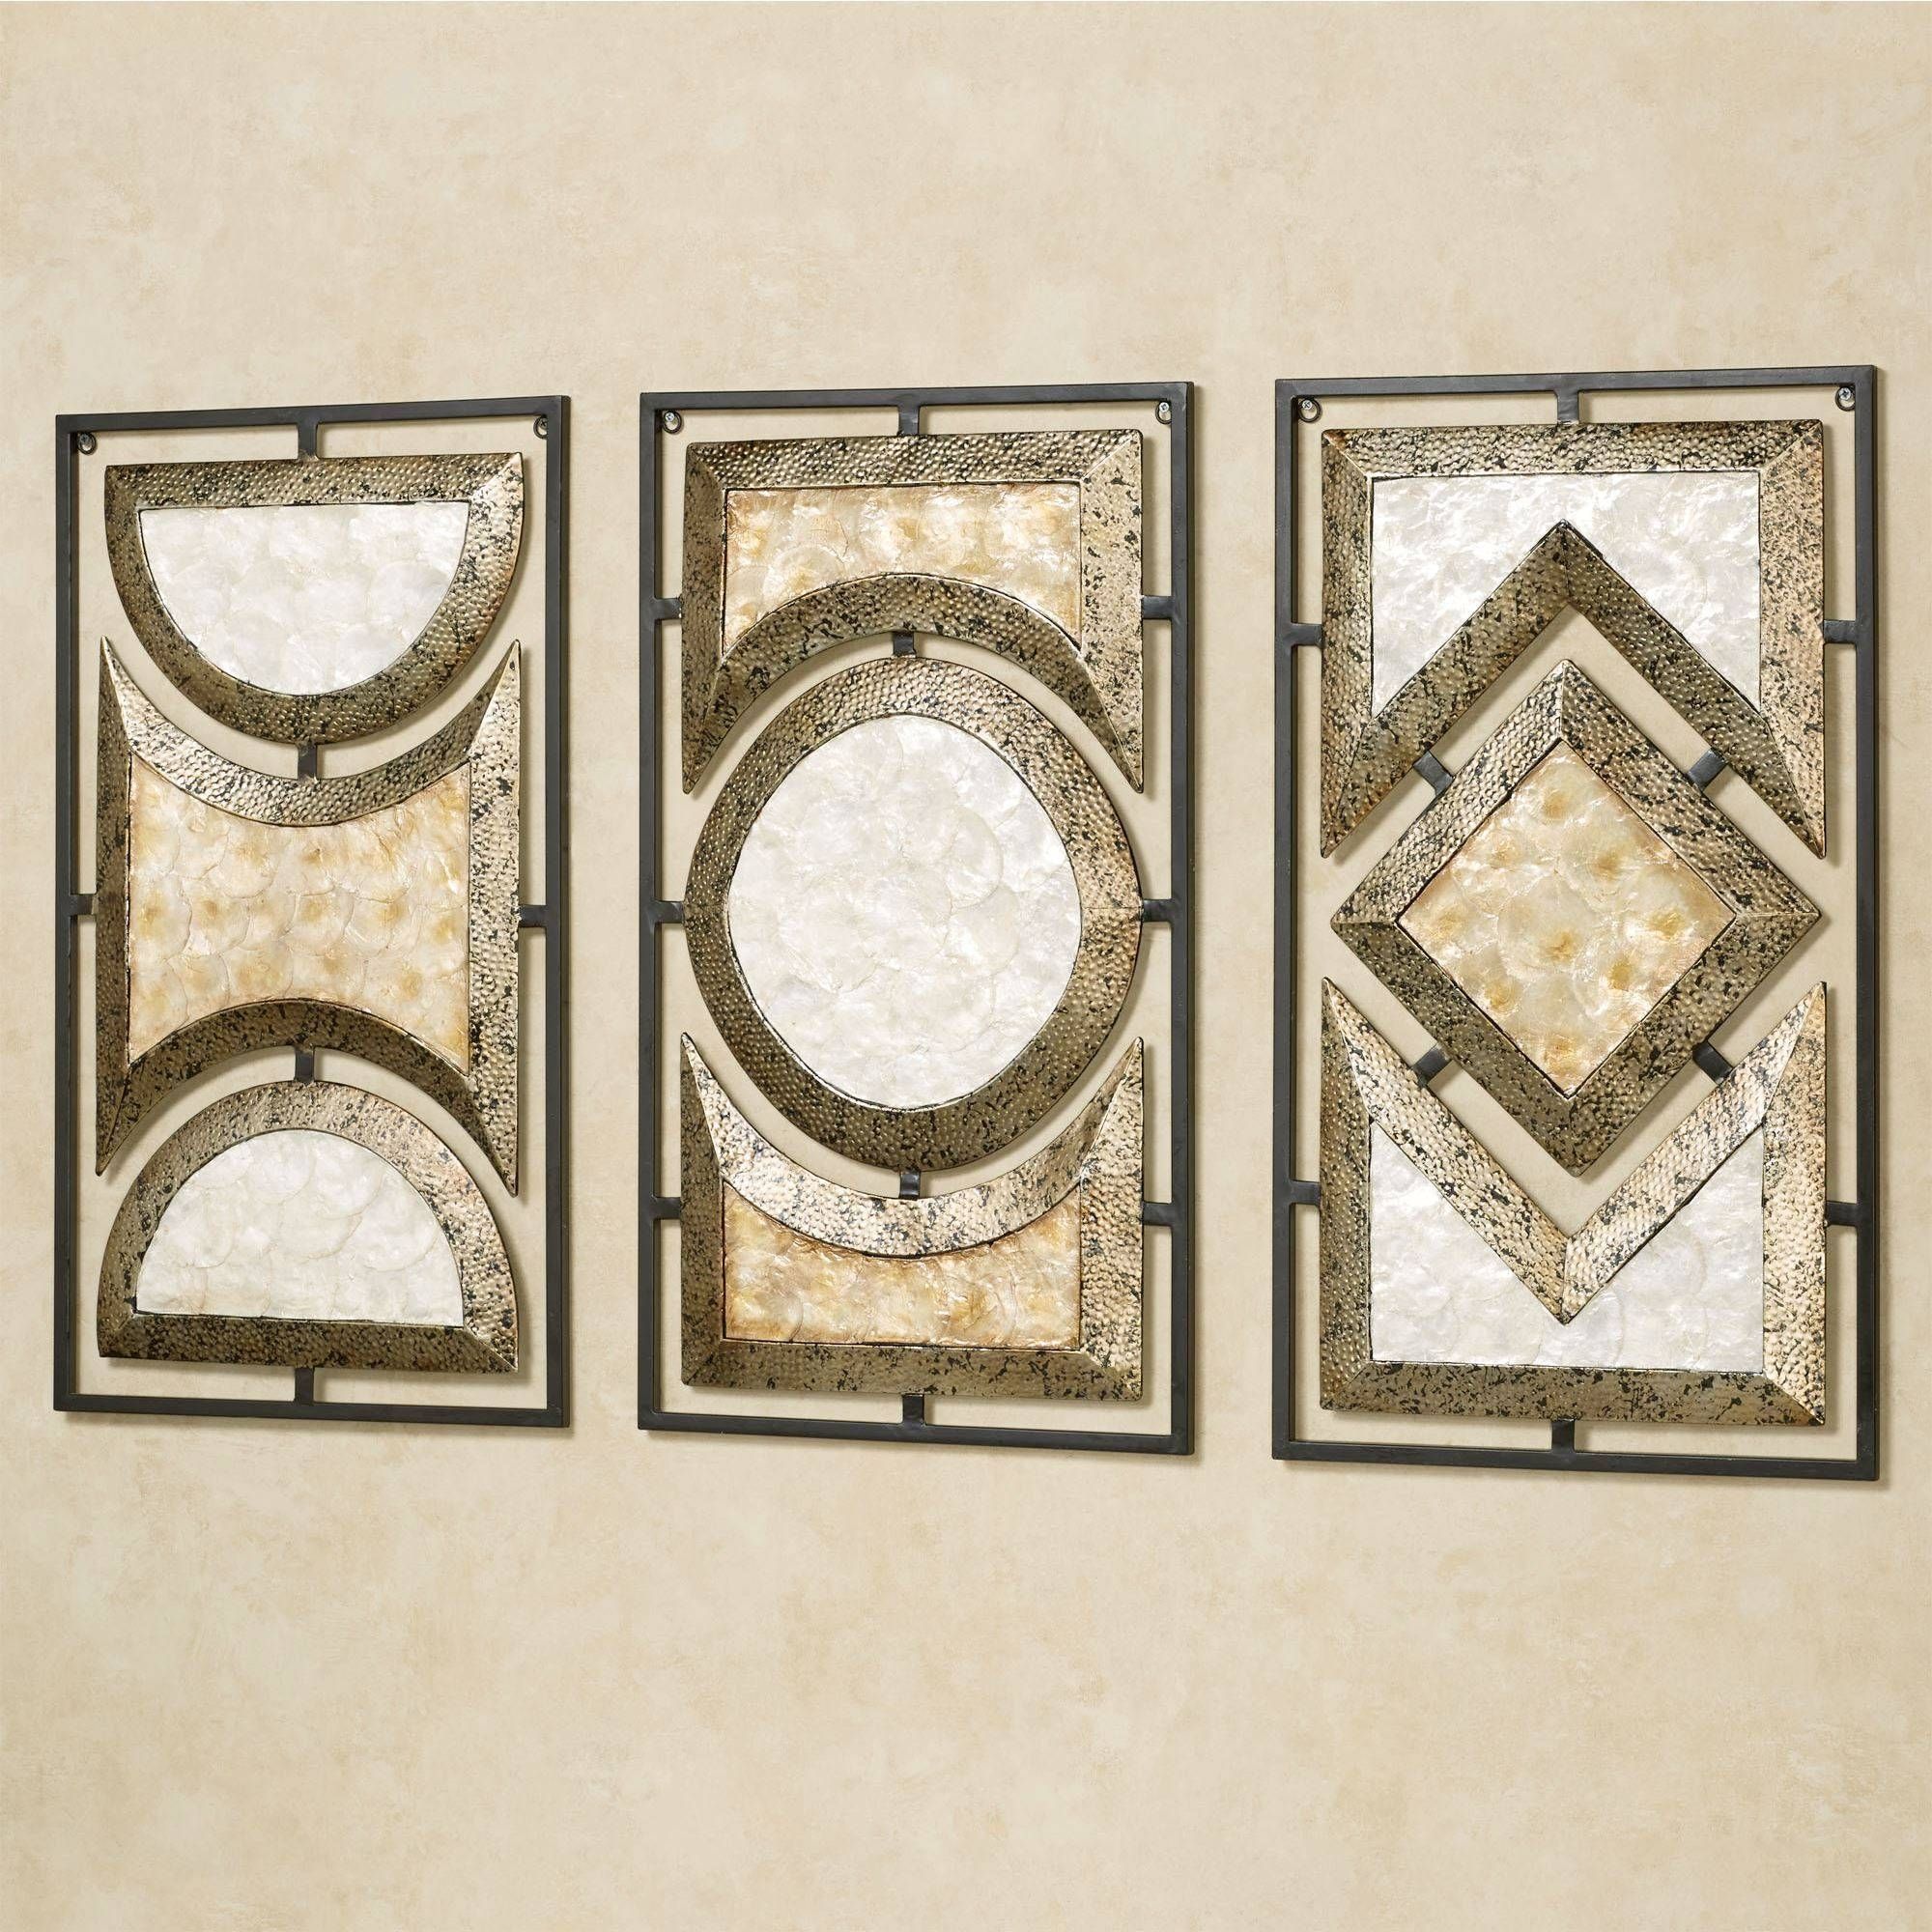 Pasquale Capiz Shell Metal Wall Art Set Throughout Current Metal Wall Art (View 3 of 30)